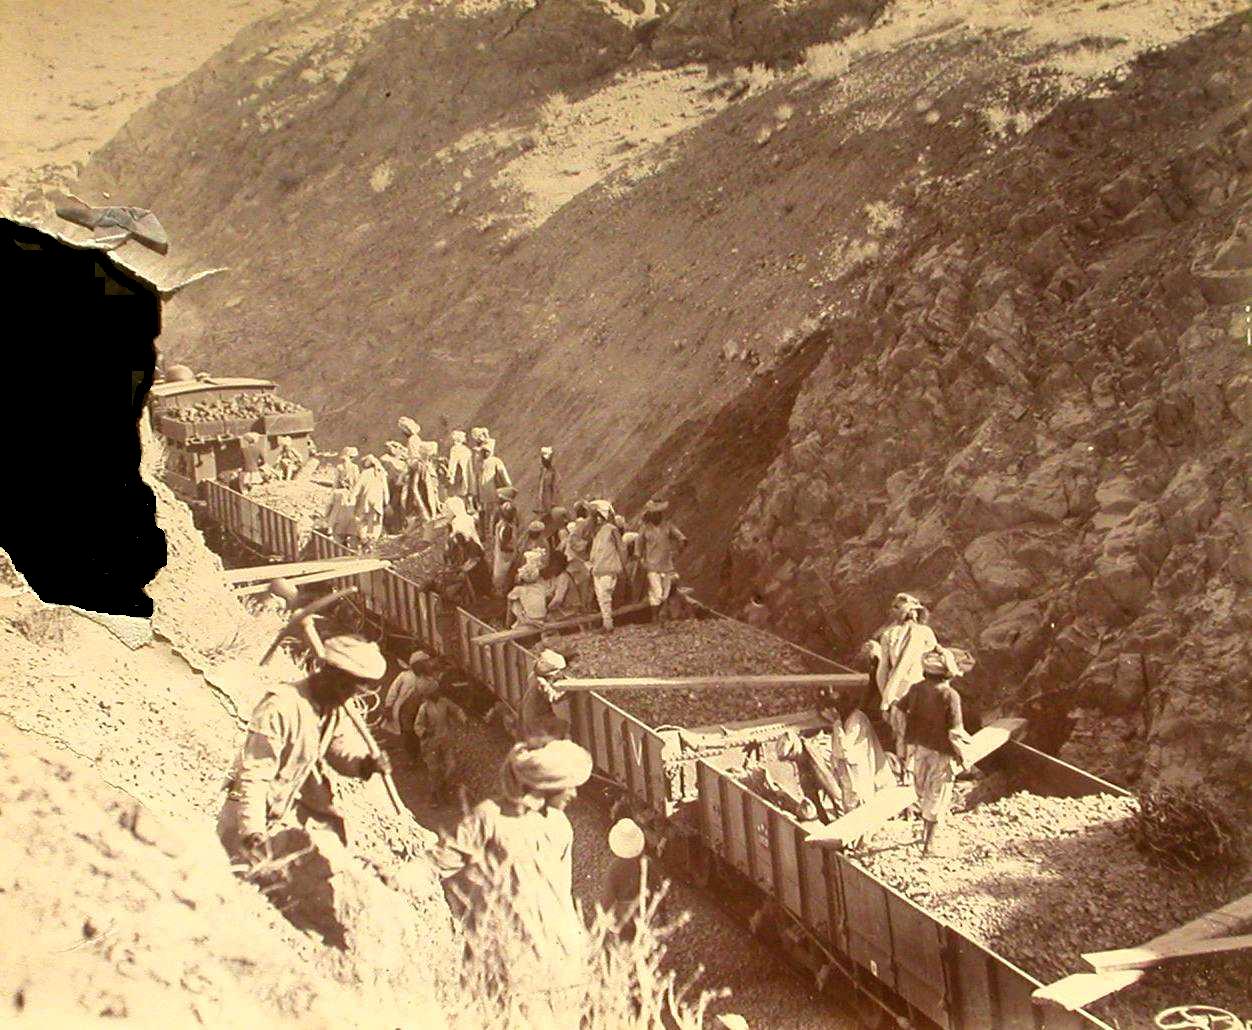 Maintenance train on the Bolan Pass line, 1890. Photo by William Edge.